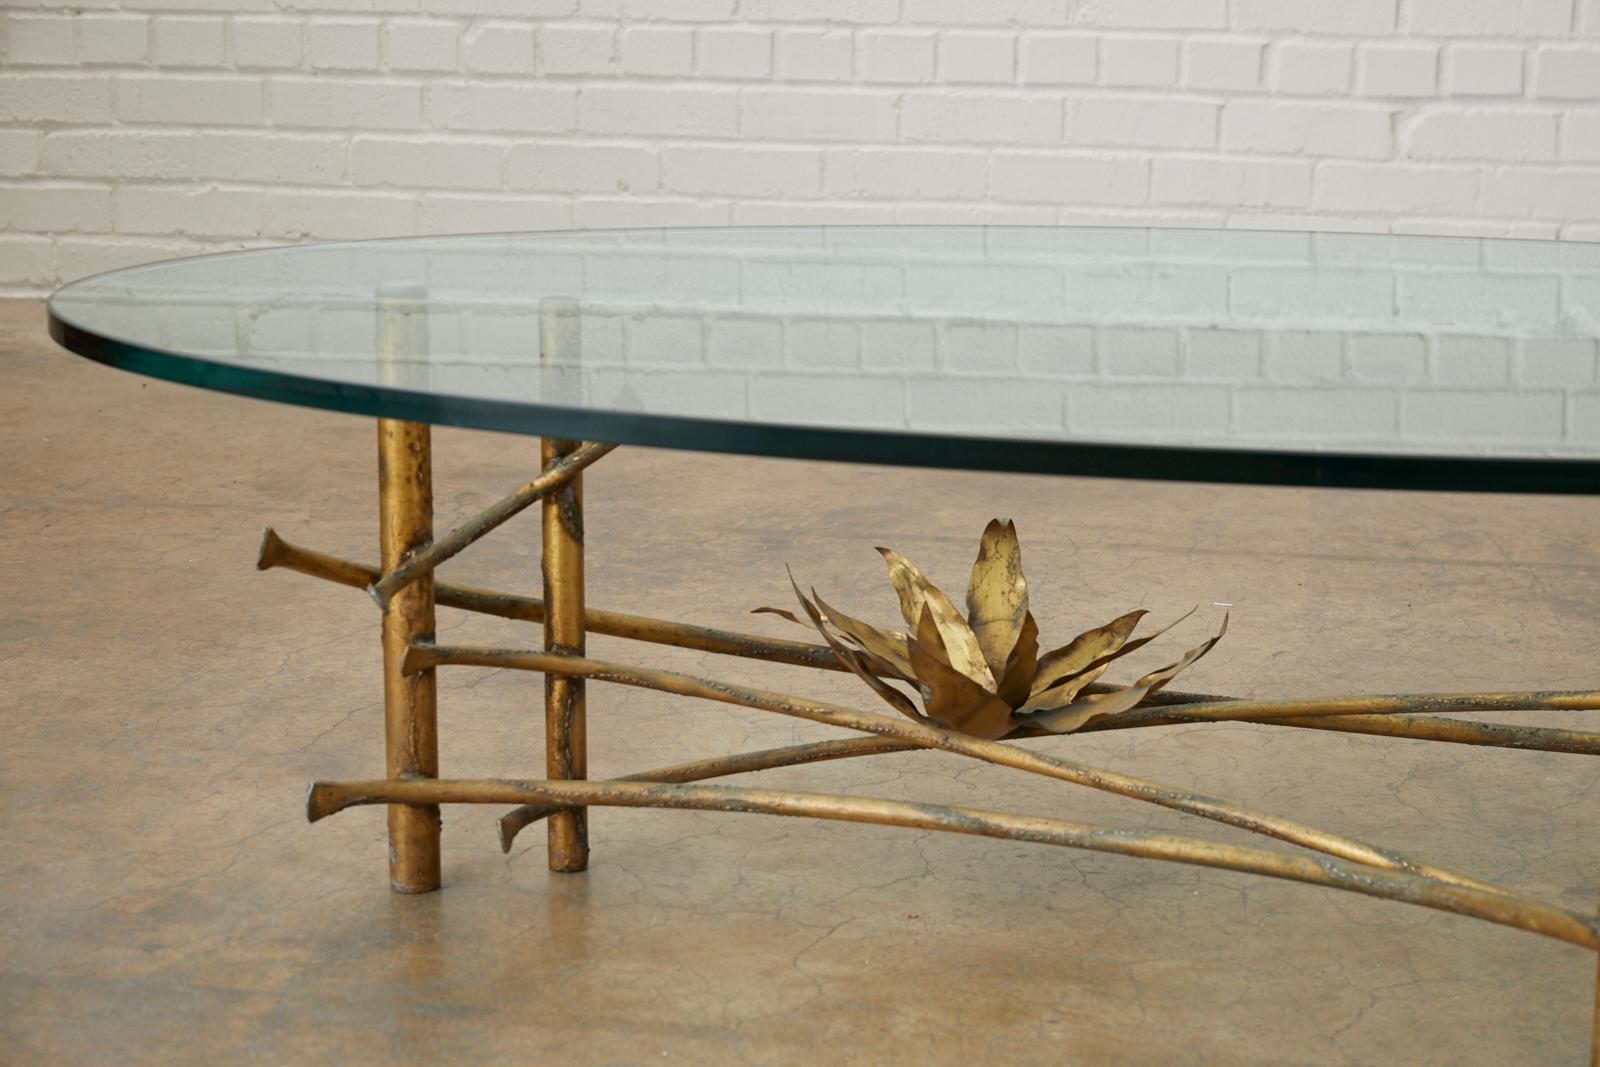 Stylish Mid-Century Modern coffee table or cocktail table made in the manner and style of Silas Seandel. Features a large iron base with a gilt bronze finish. Graceful branches connect pairs of legs with a delicate waterlily or lotus blossom mounted